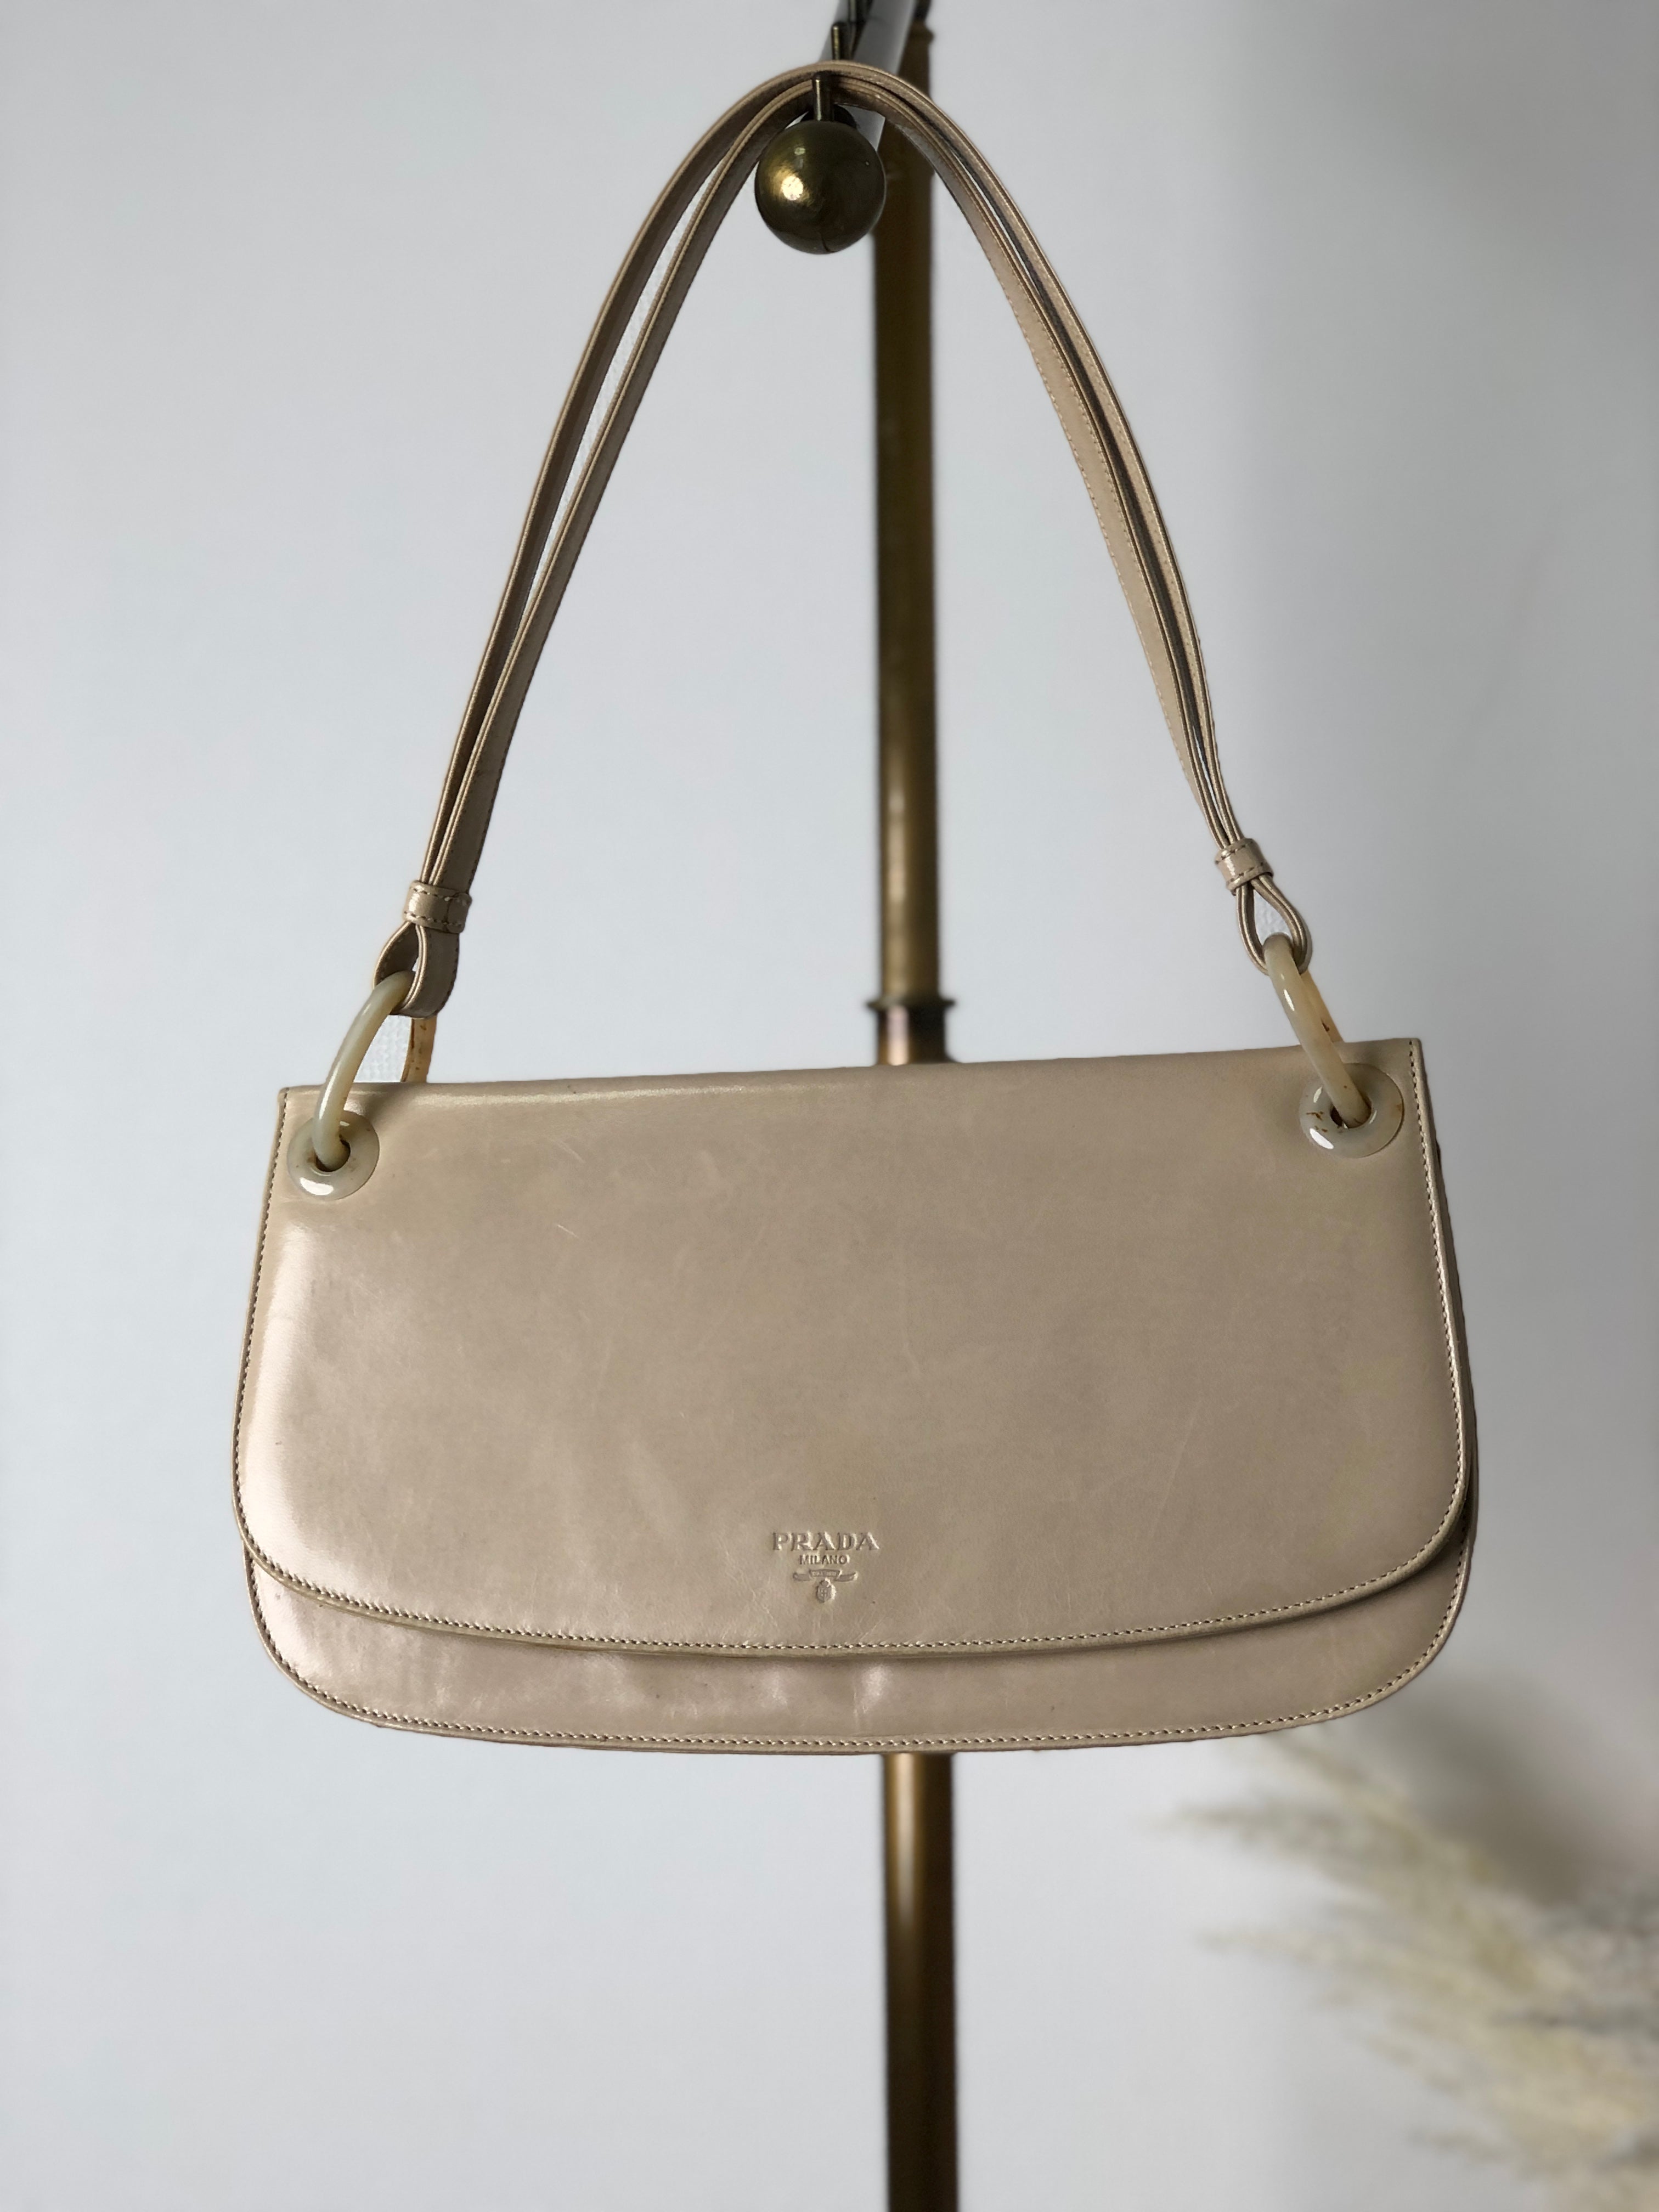 Vintage Prada bag | Irene Buffa Store: Fashion marketplace for the best  pre-loved luxury items